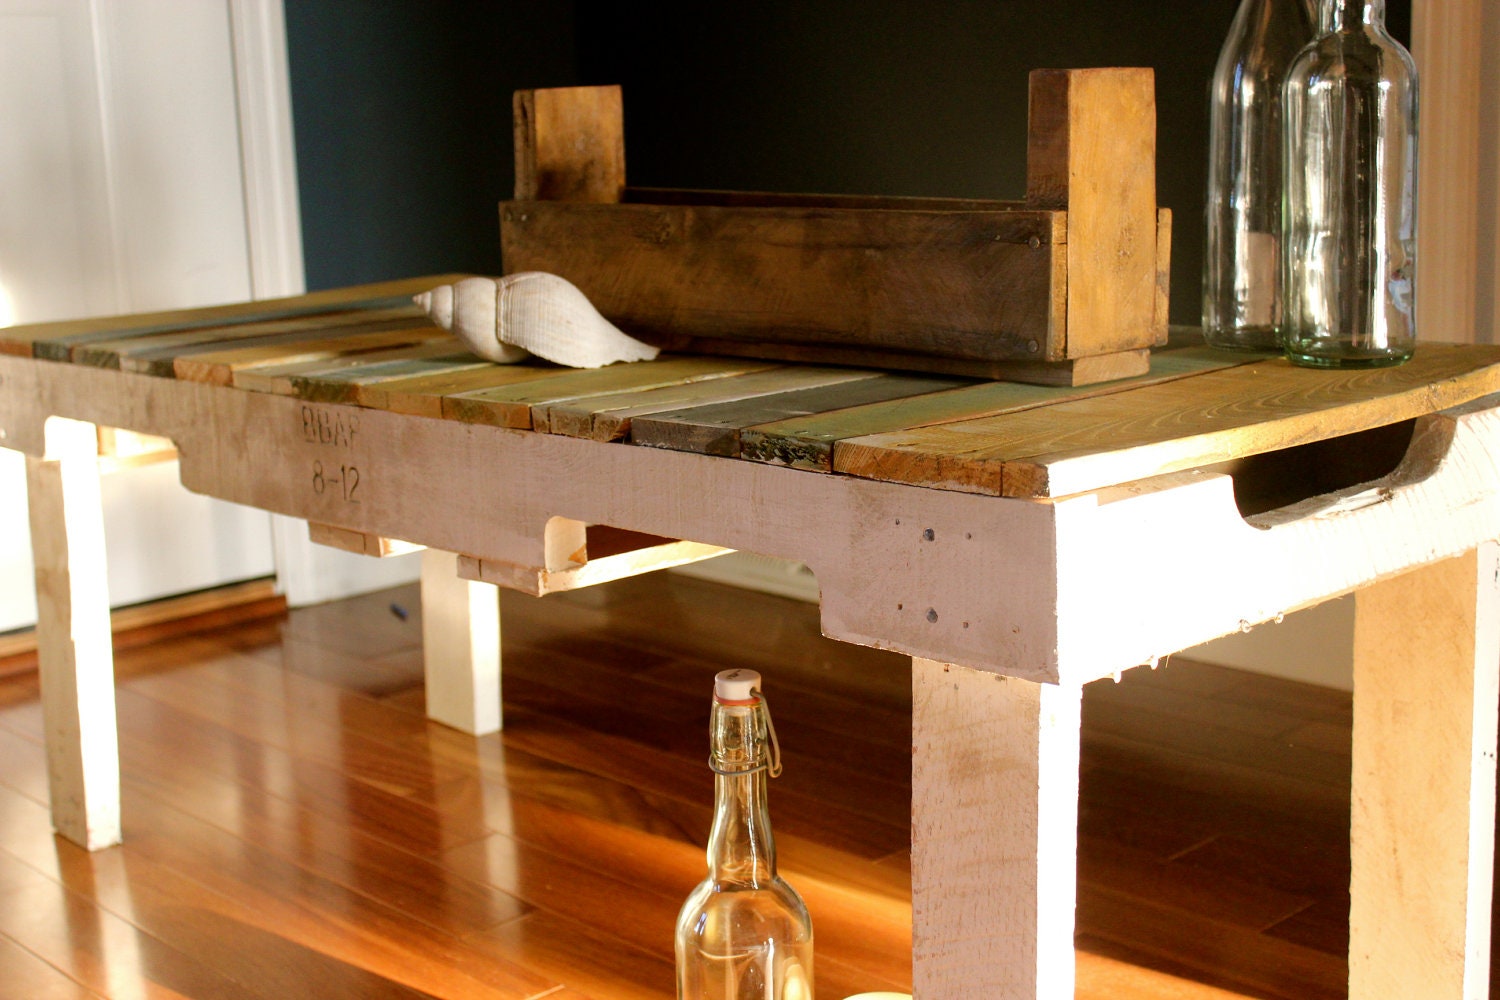 Rustic bench or coffee table pallet bench or table by RuralCoast